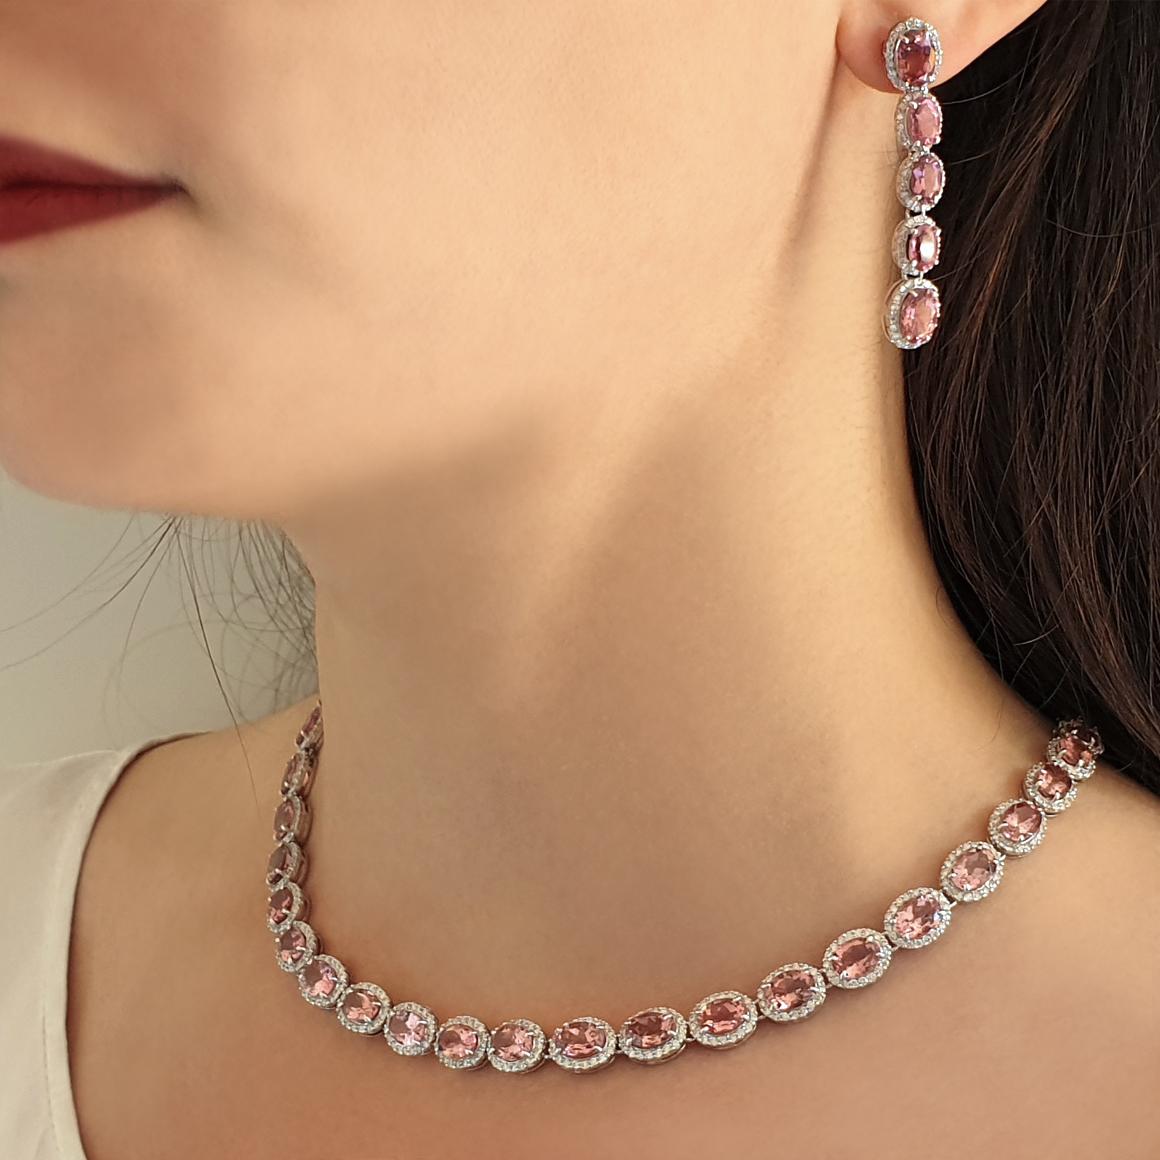 Necklace in 18k white gold with pink Tourmaline (oval cut, size: 5x7 mm, cts 28,50) and white Diamonds ct 3,60 VS colour G/H.   cm 42
Even the simplest of outfits can be transformed  with the right accessories! With amazing necklace made in Italy by